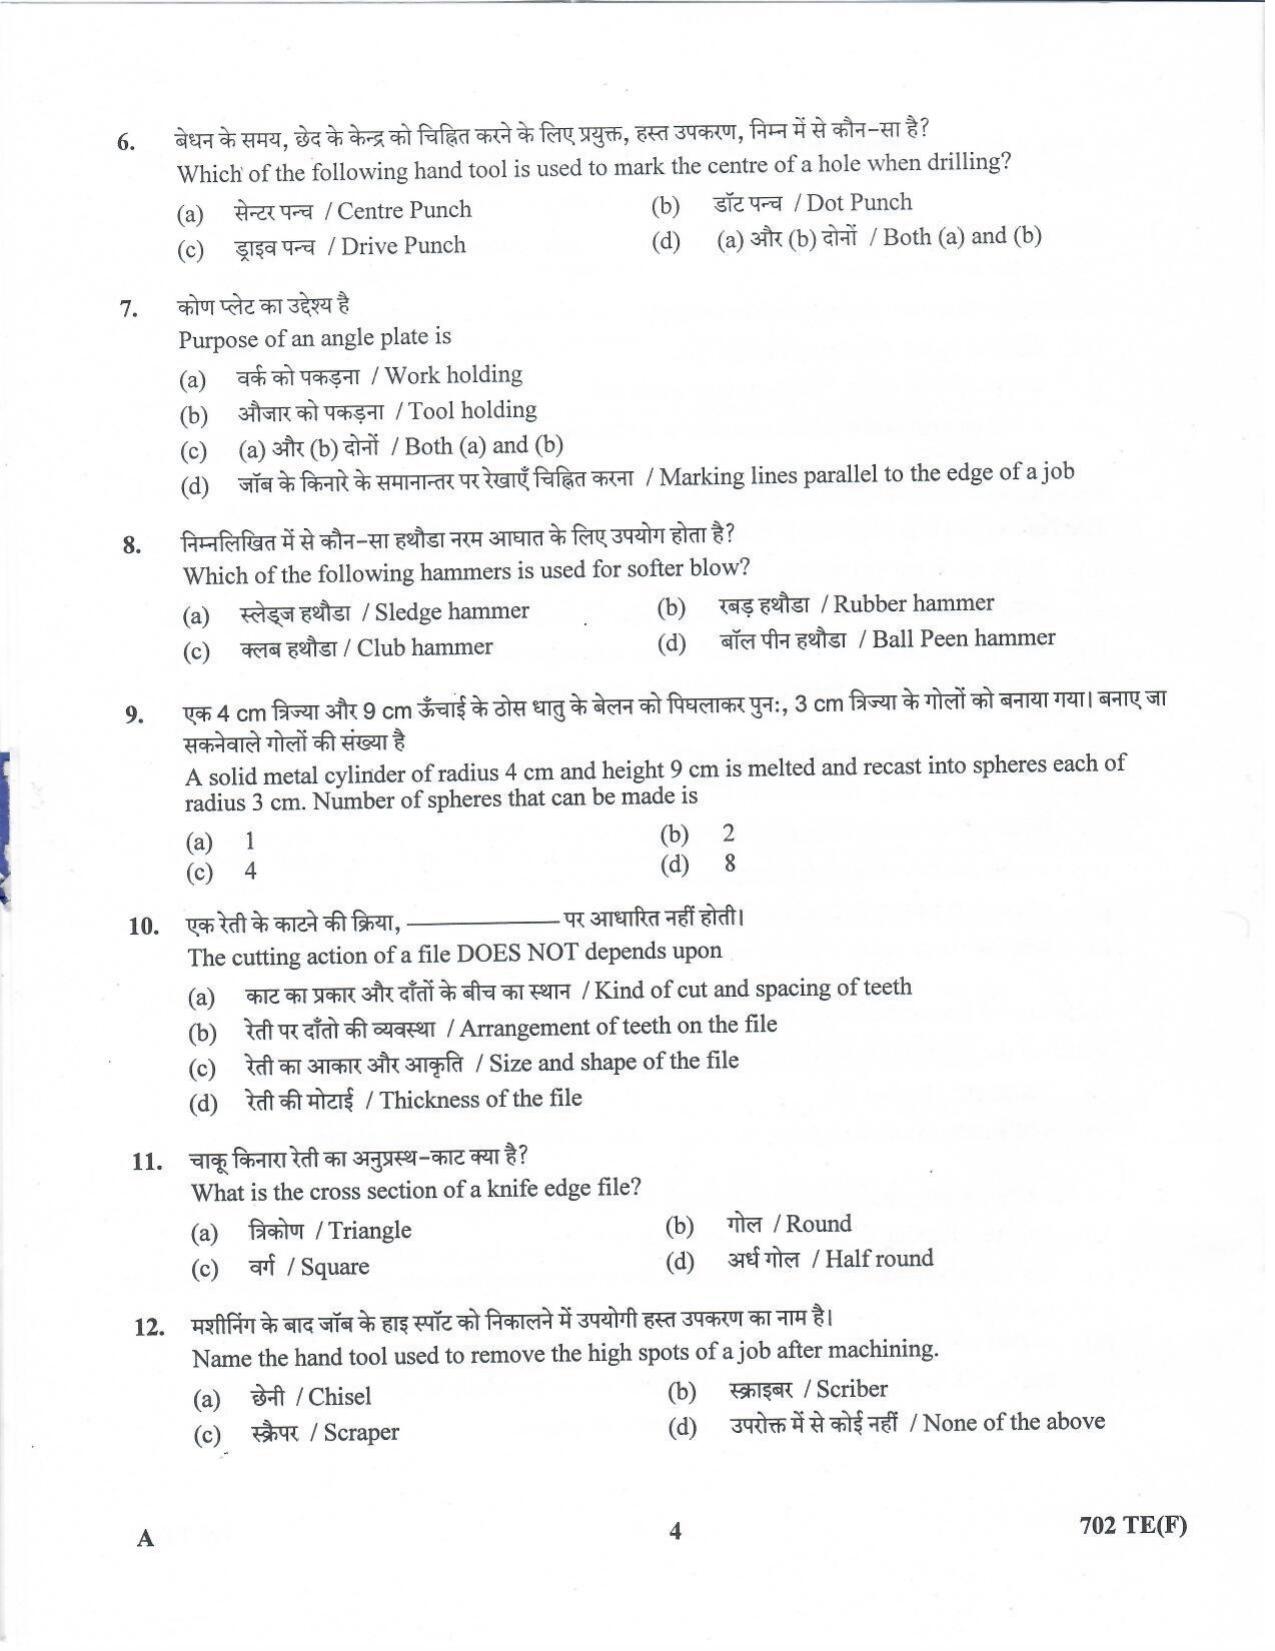 LPSC Technician ‘B’ (Fitter) 2020 Question Paper - Page 3